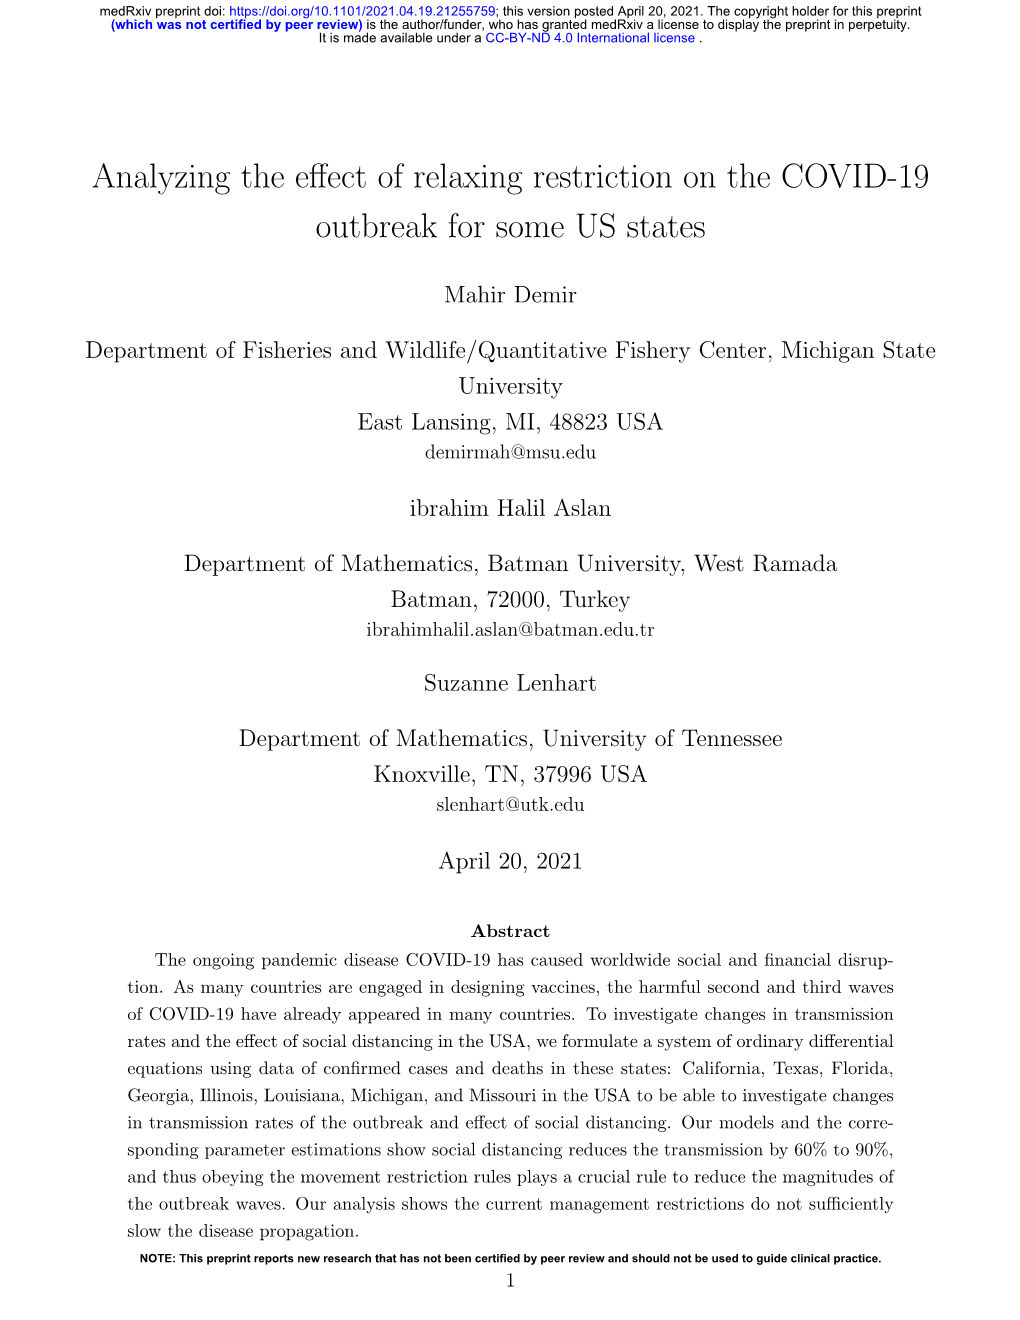 Analyzing the Effect of Relaxing Restriction on the COVID-19